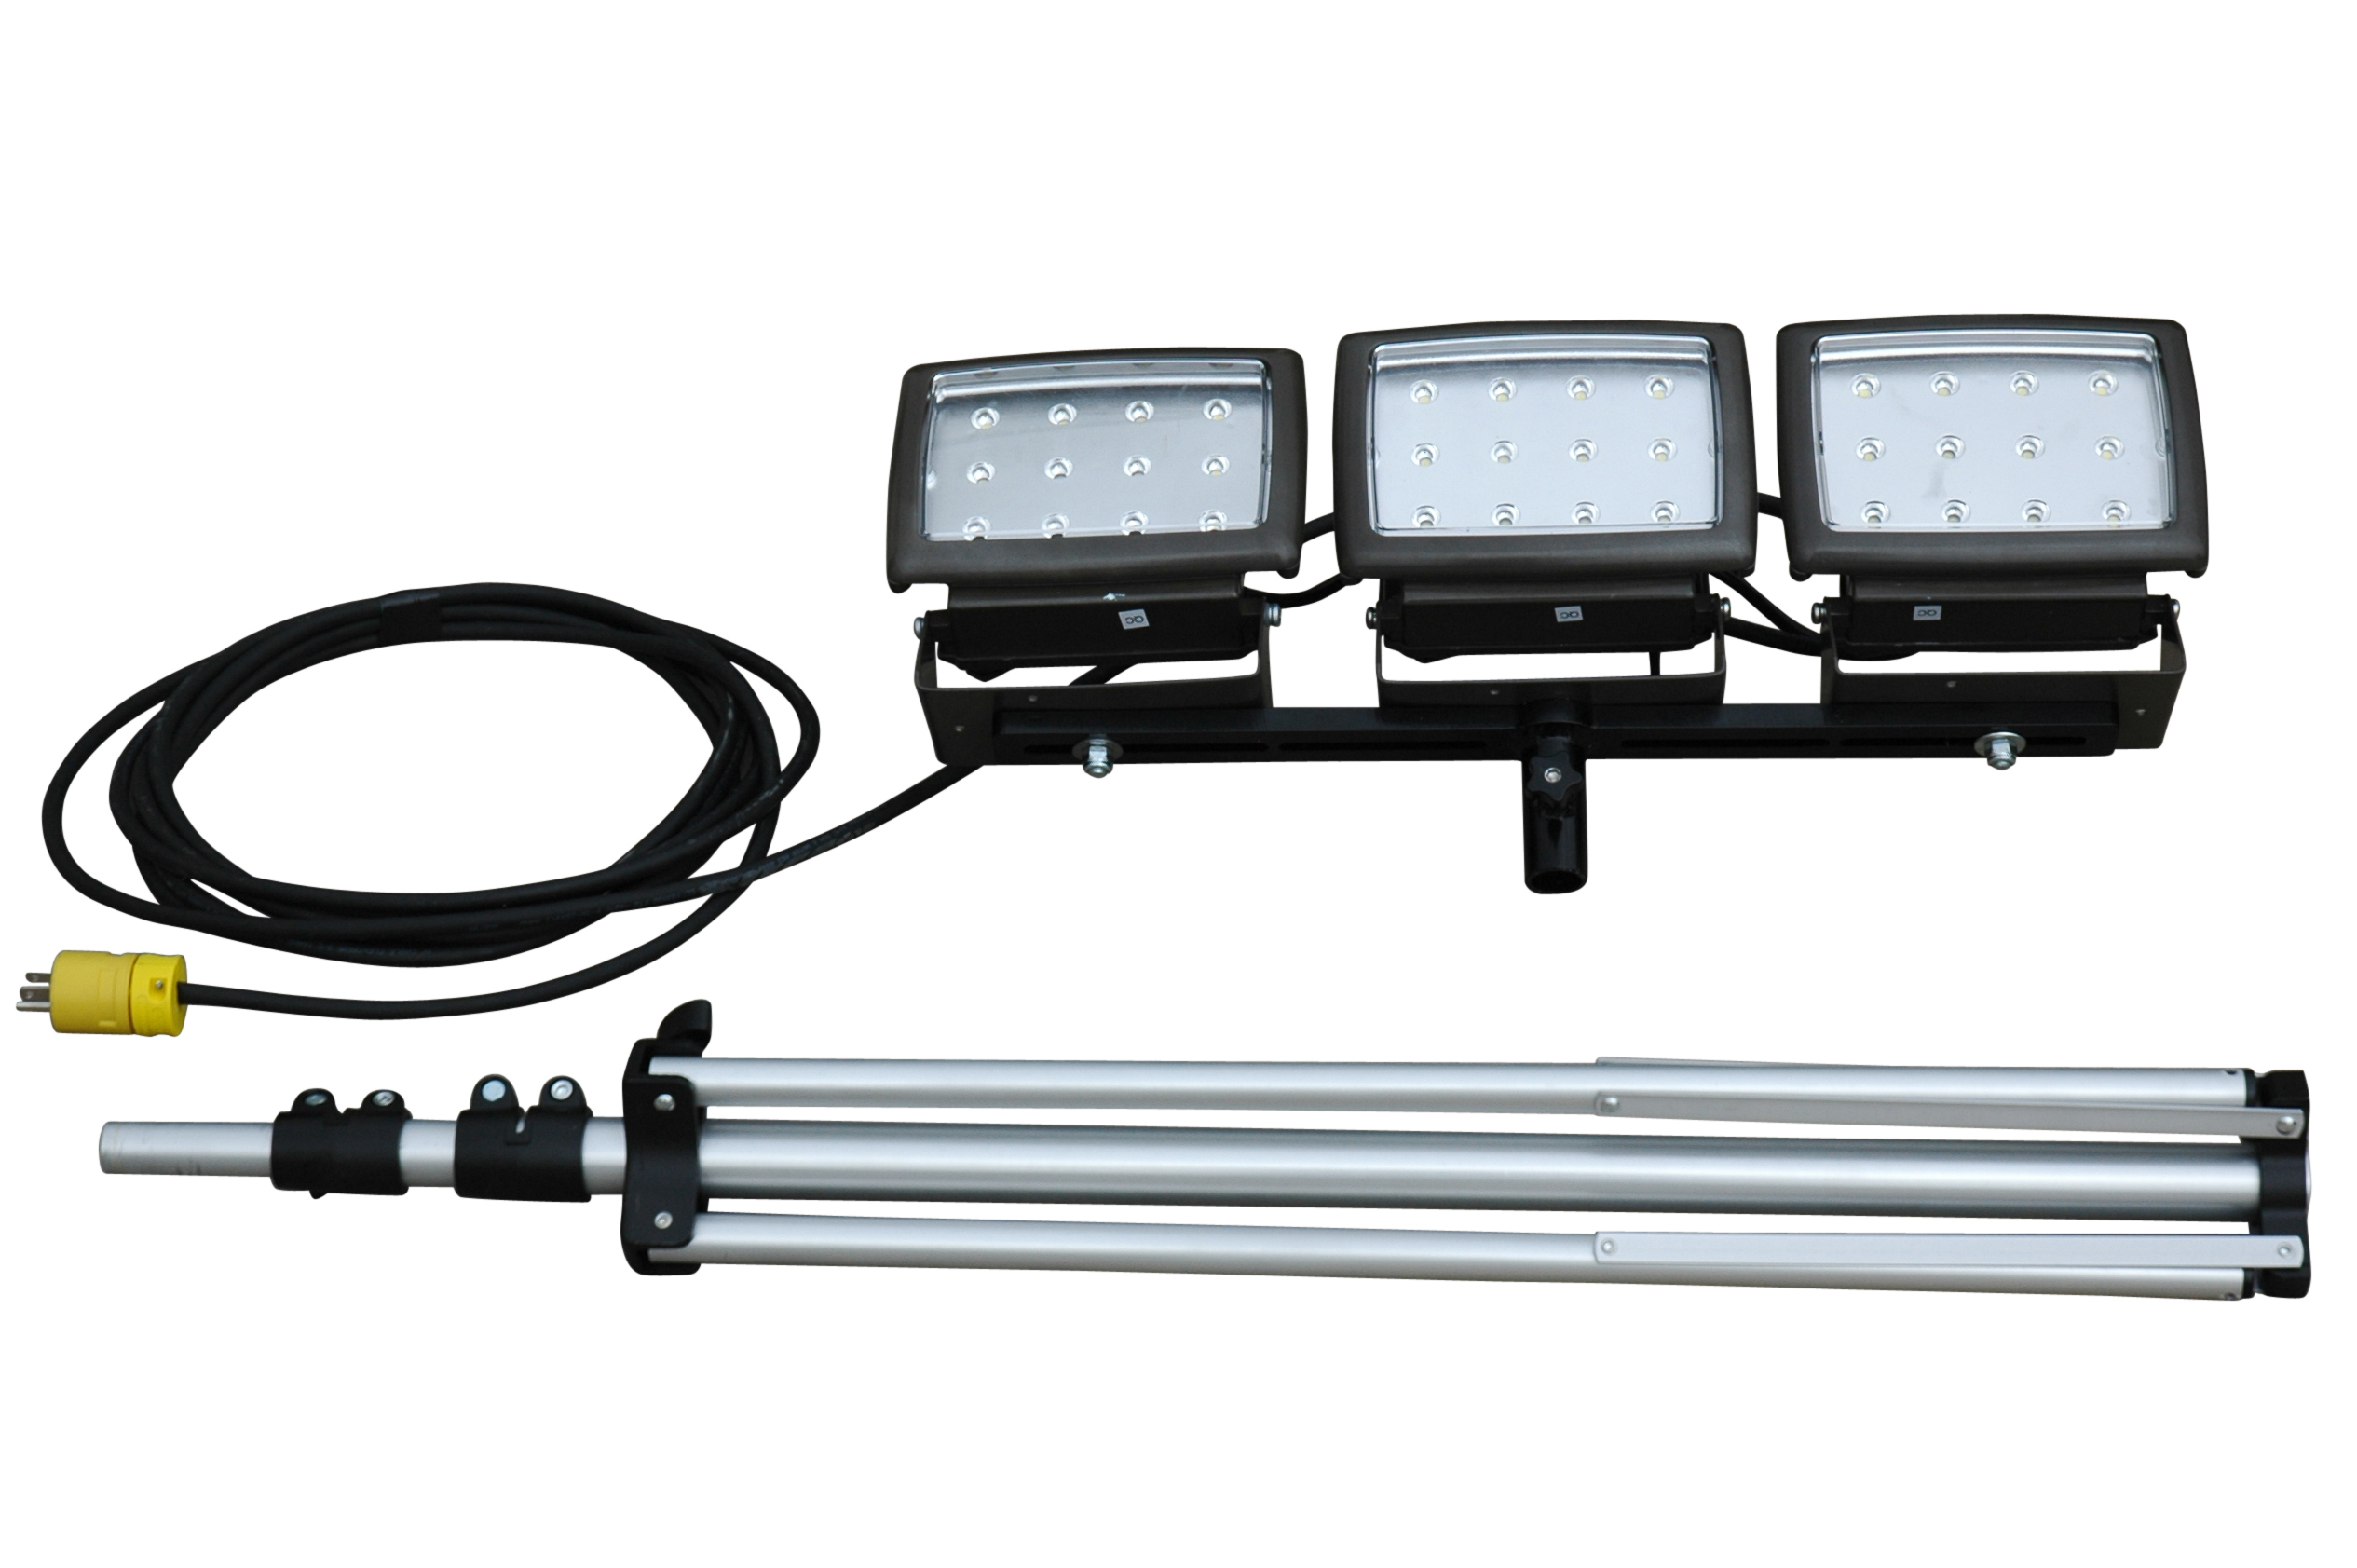 Telescoping Tripod Work Light that Collapses for transport and storage